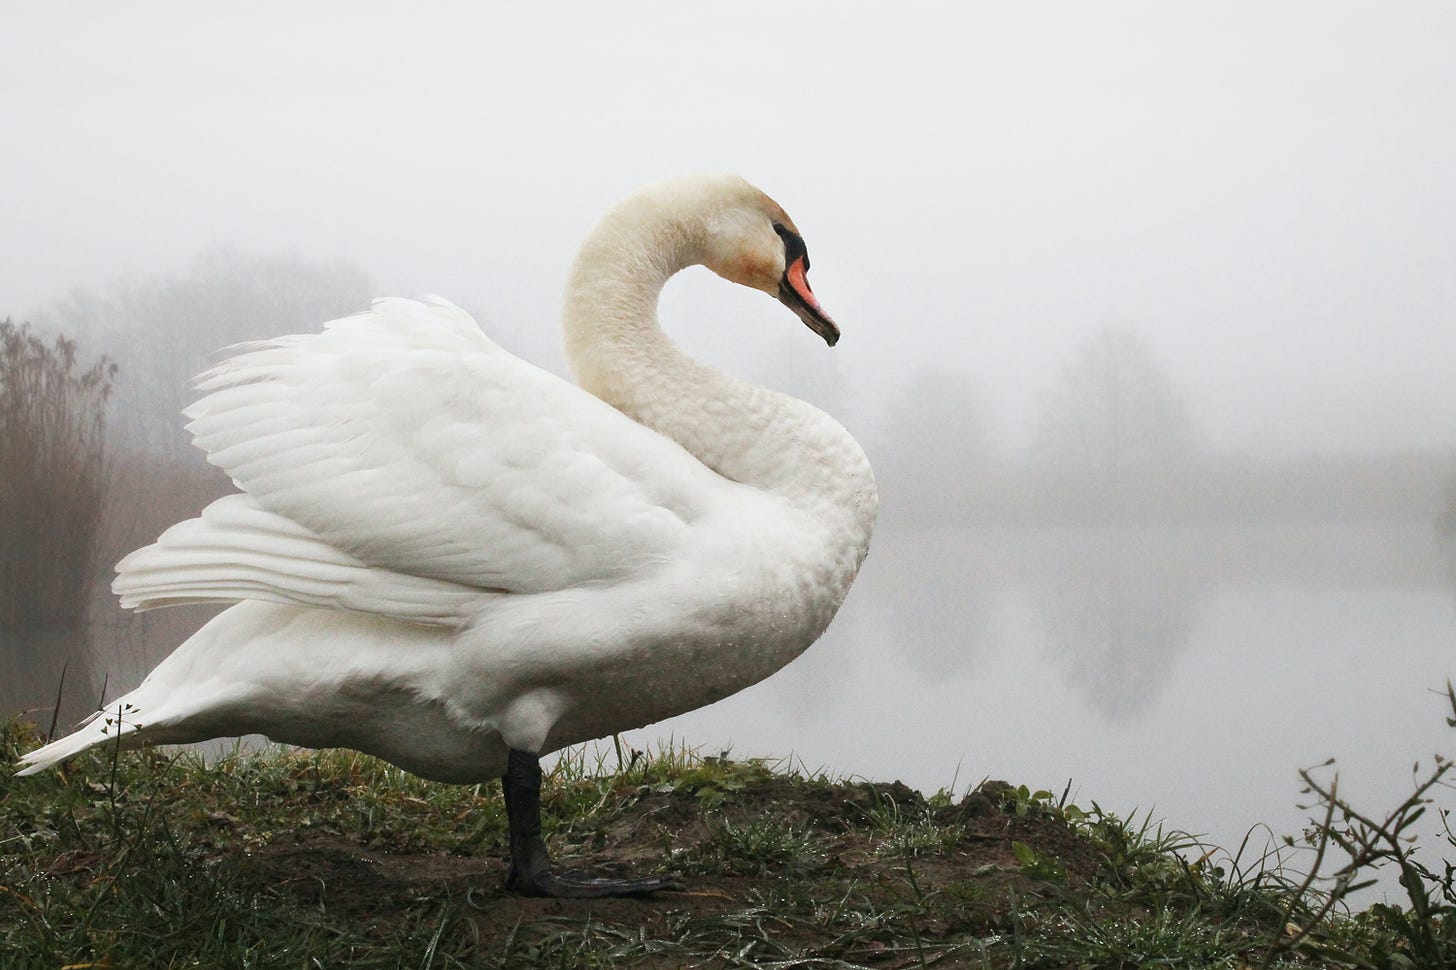 Image description: A white swan on the bank of a pond or lake, with fog in the background. 